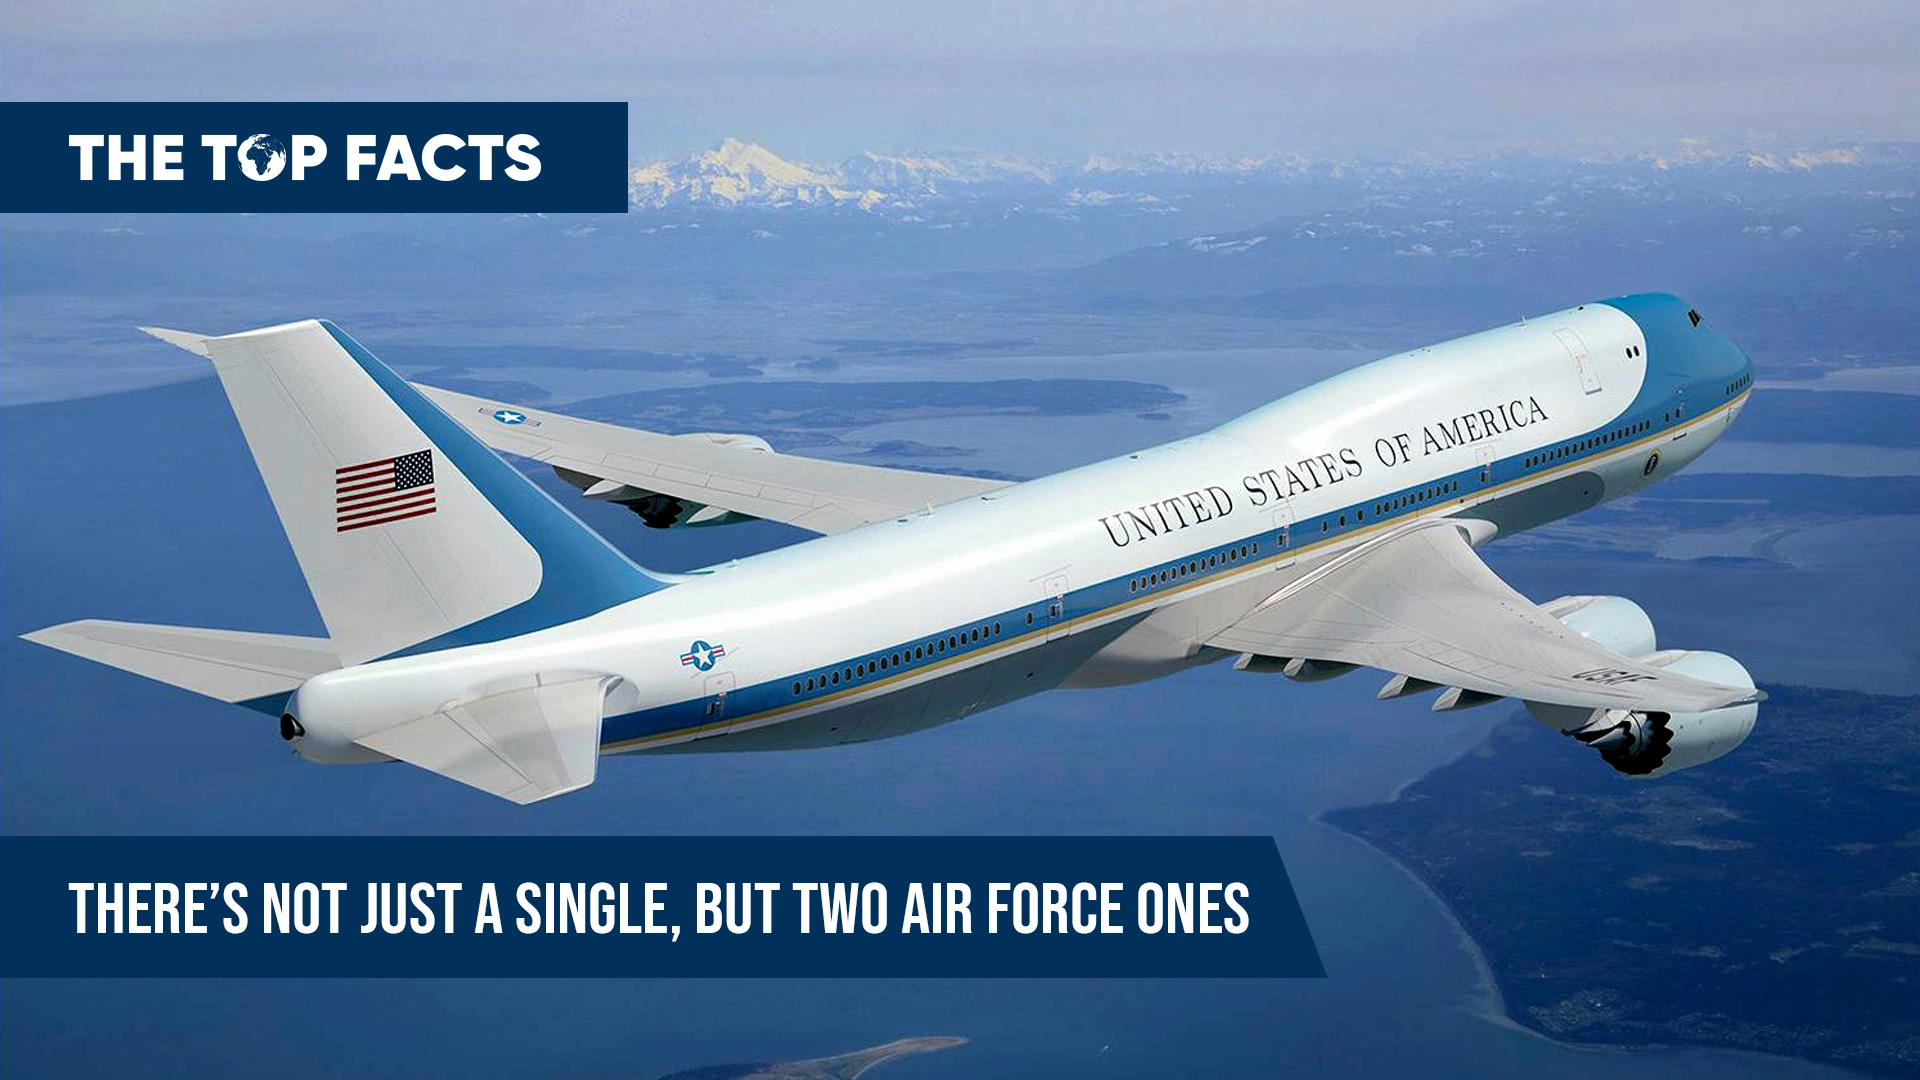 There are two planes that serve as Air Force One, the official air transportation for the President of the United States.